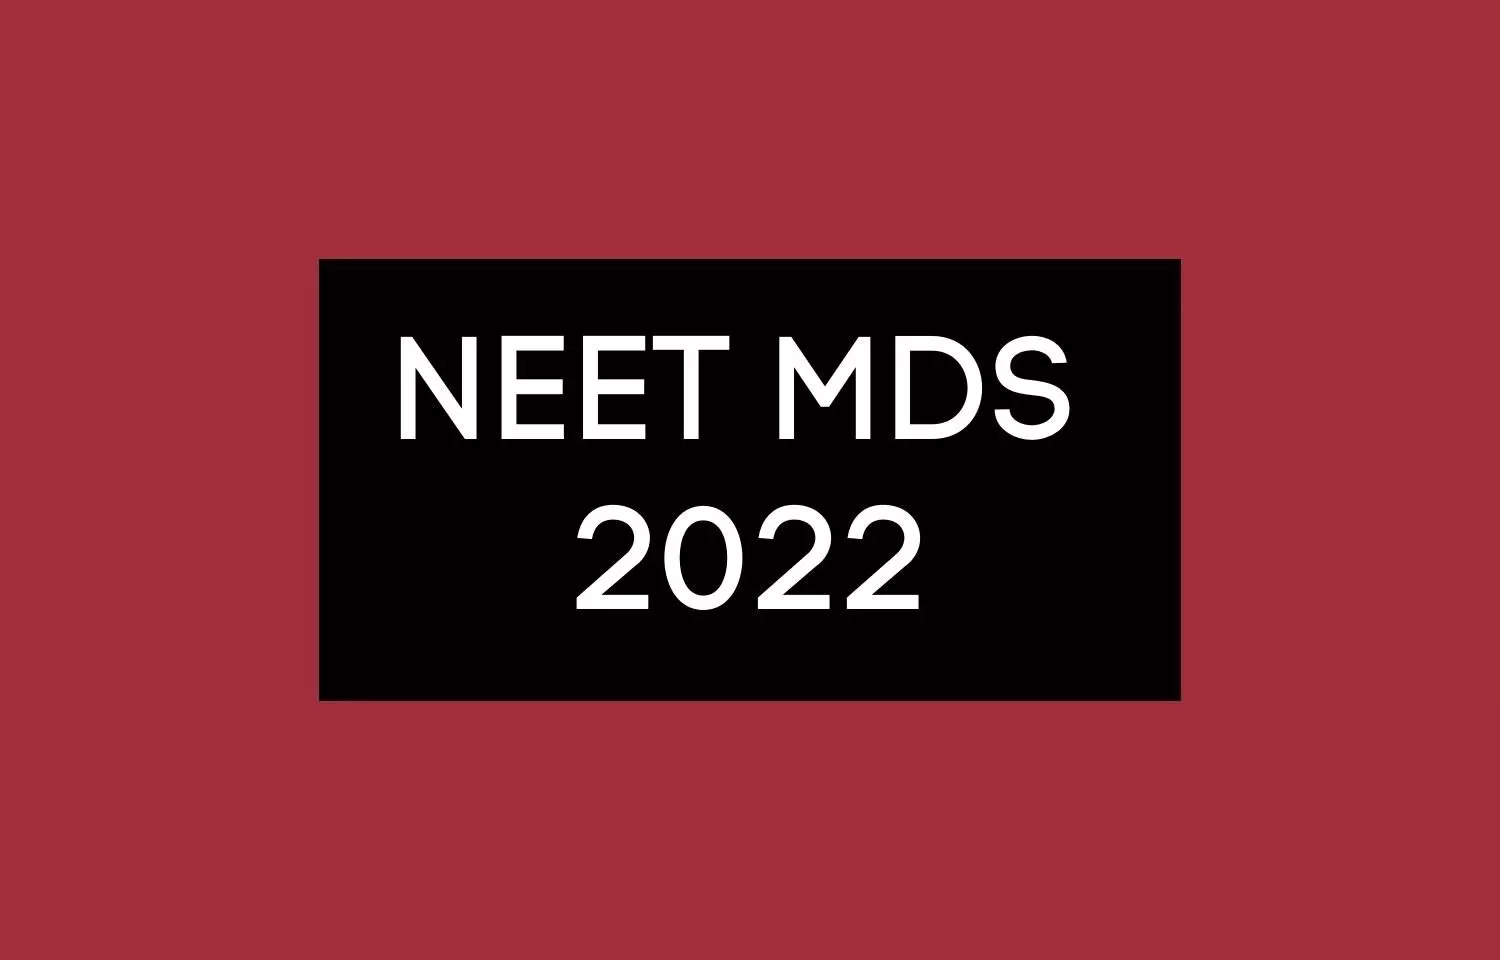 NBE to hold NEET MDS 2022 in March as planned, invites Applications